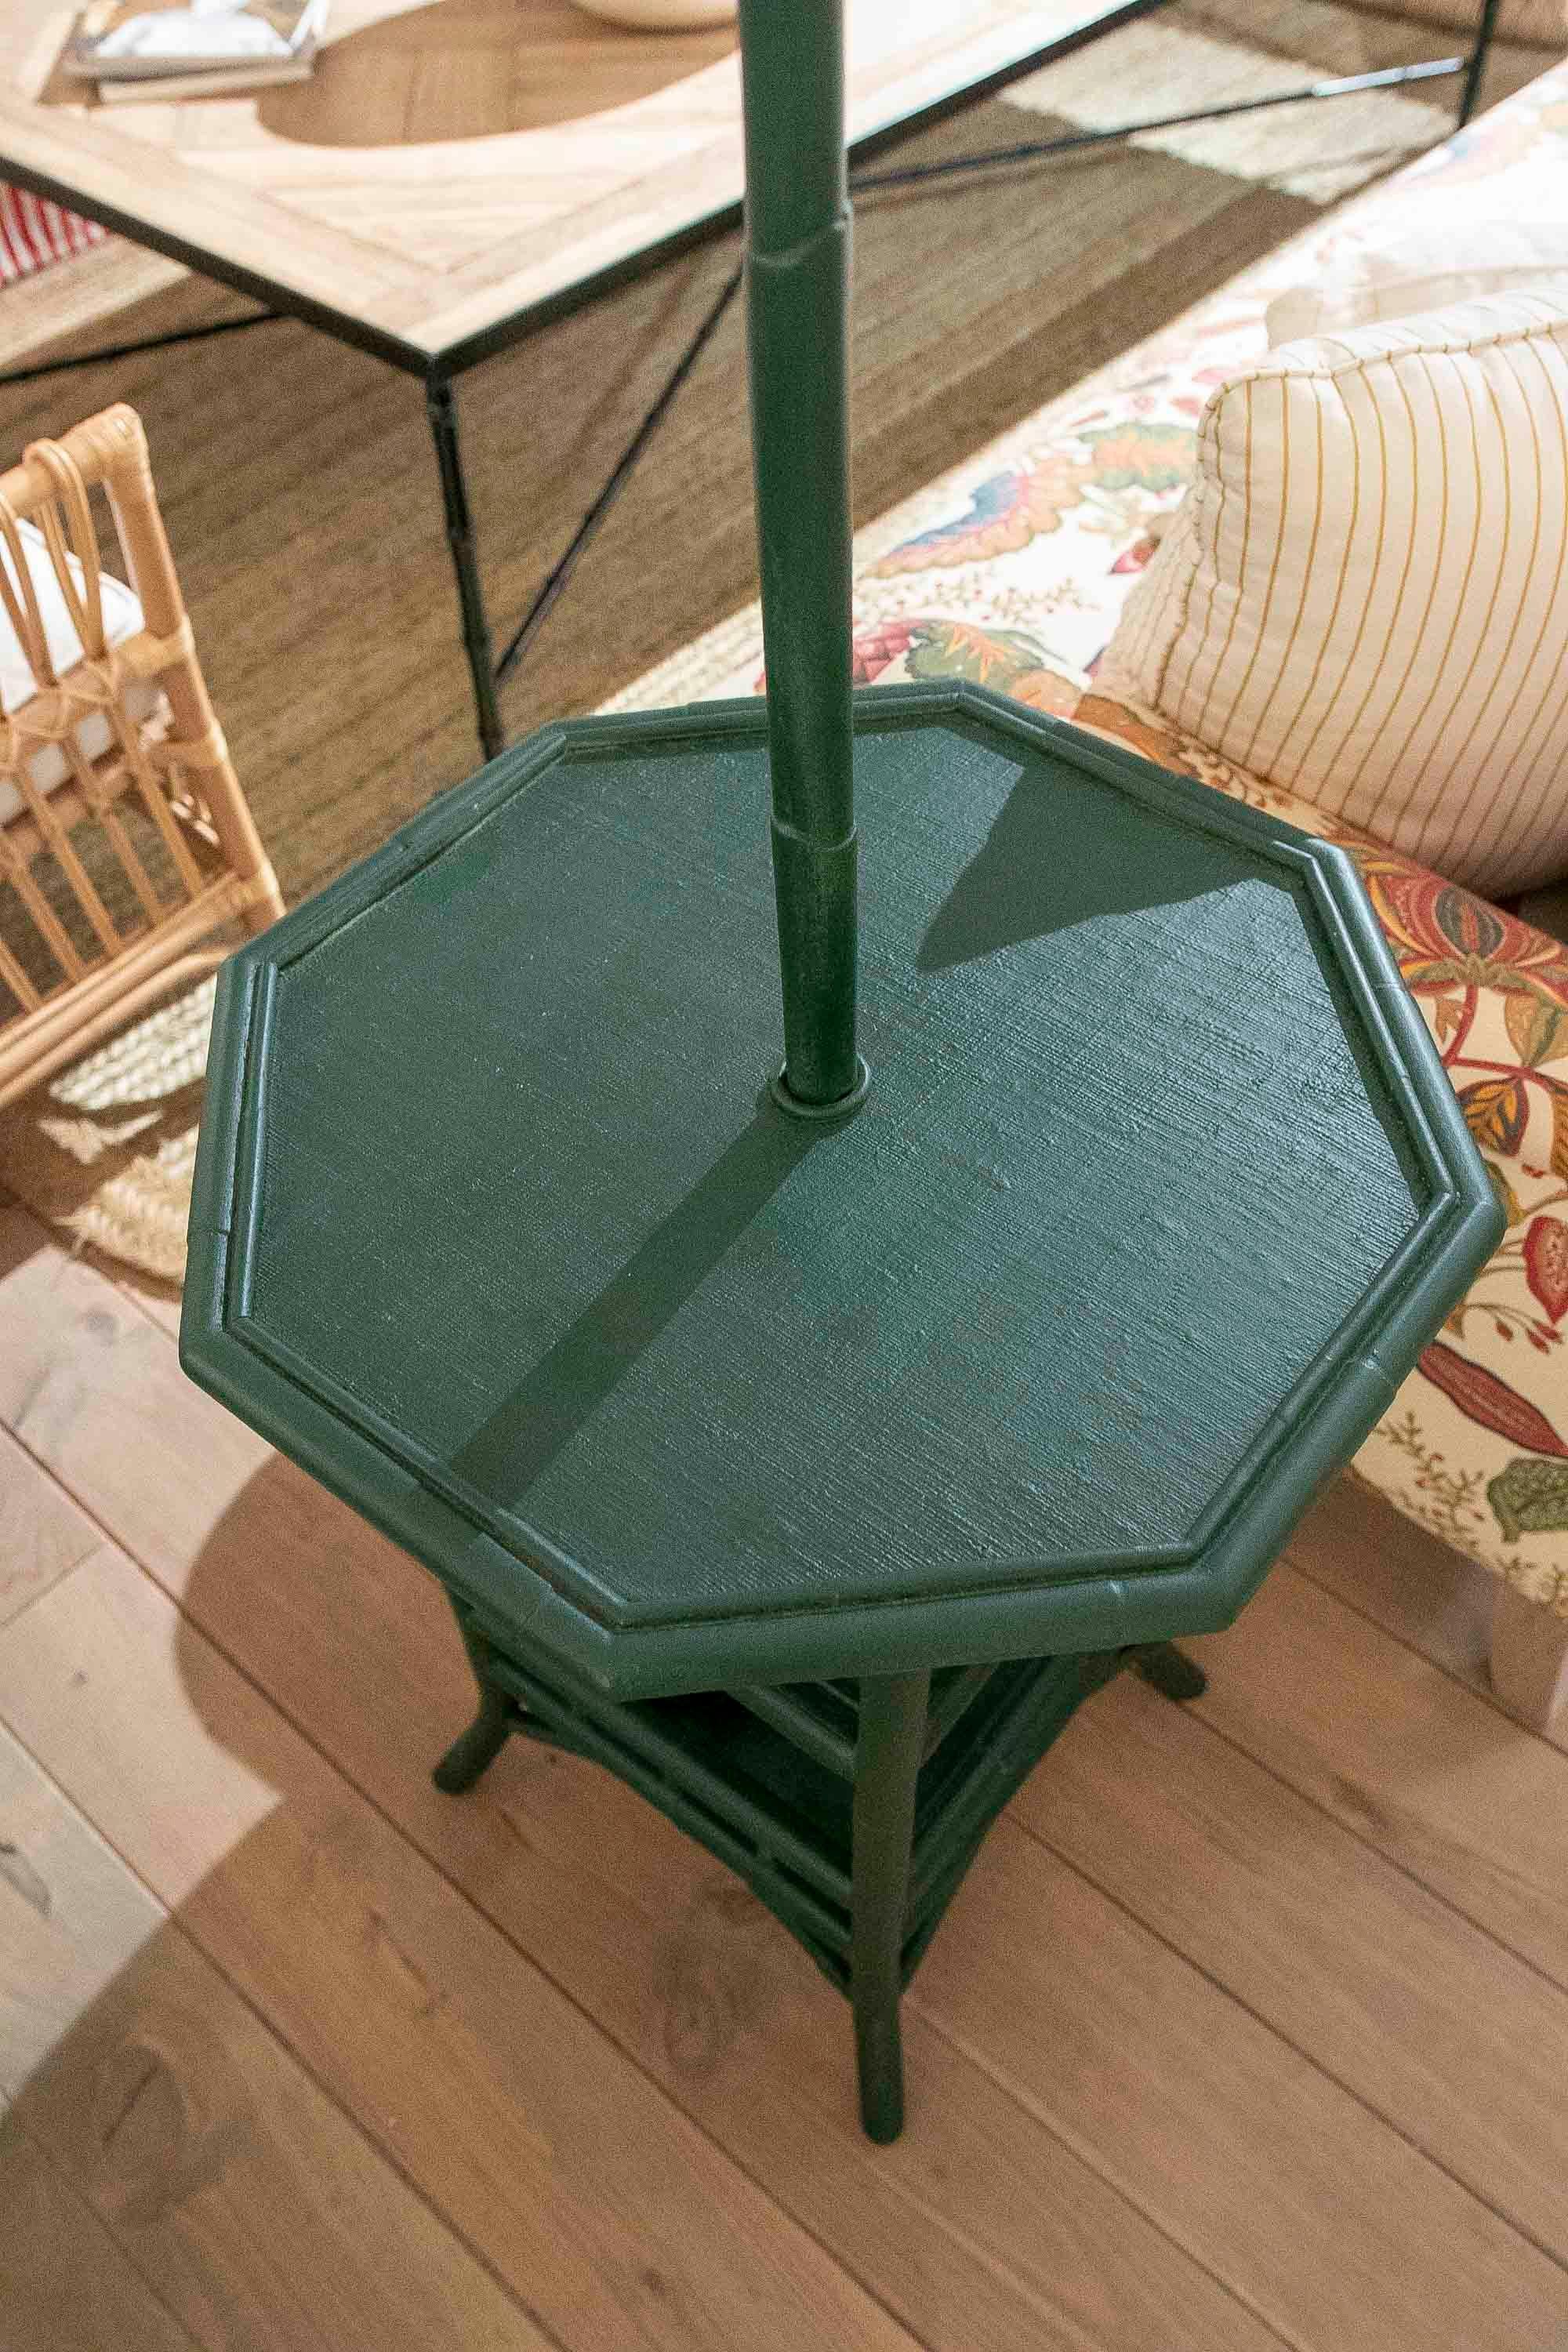 Bamboo and Wicker Floor Lamp with Three Shelves Painted in Green Tones 3